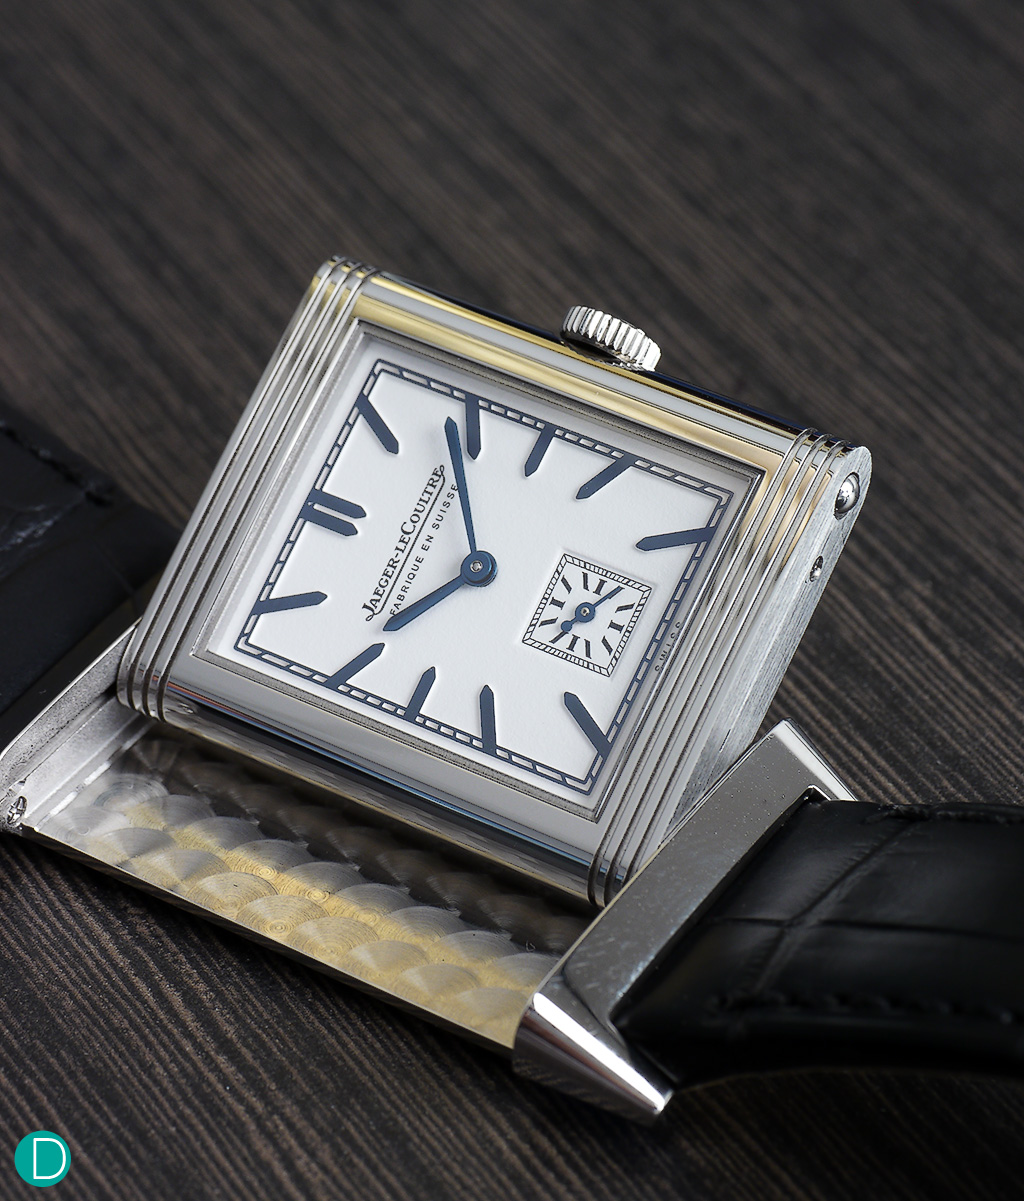 The Reverso case, first shown by JLC in 1931 is a model of beauty. It looks deceptively simple, yet the case is extremely complex, and completely made in house in Le Sentier. 